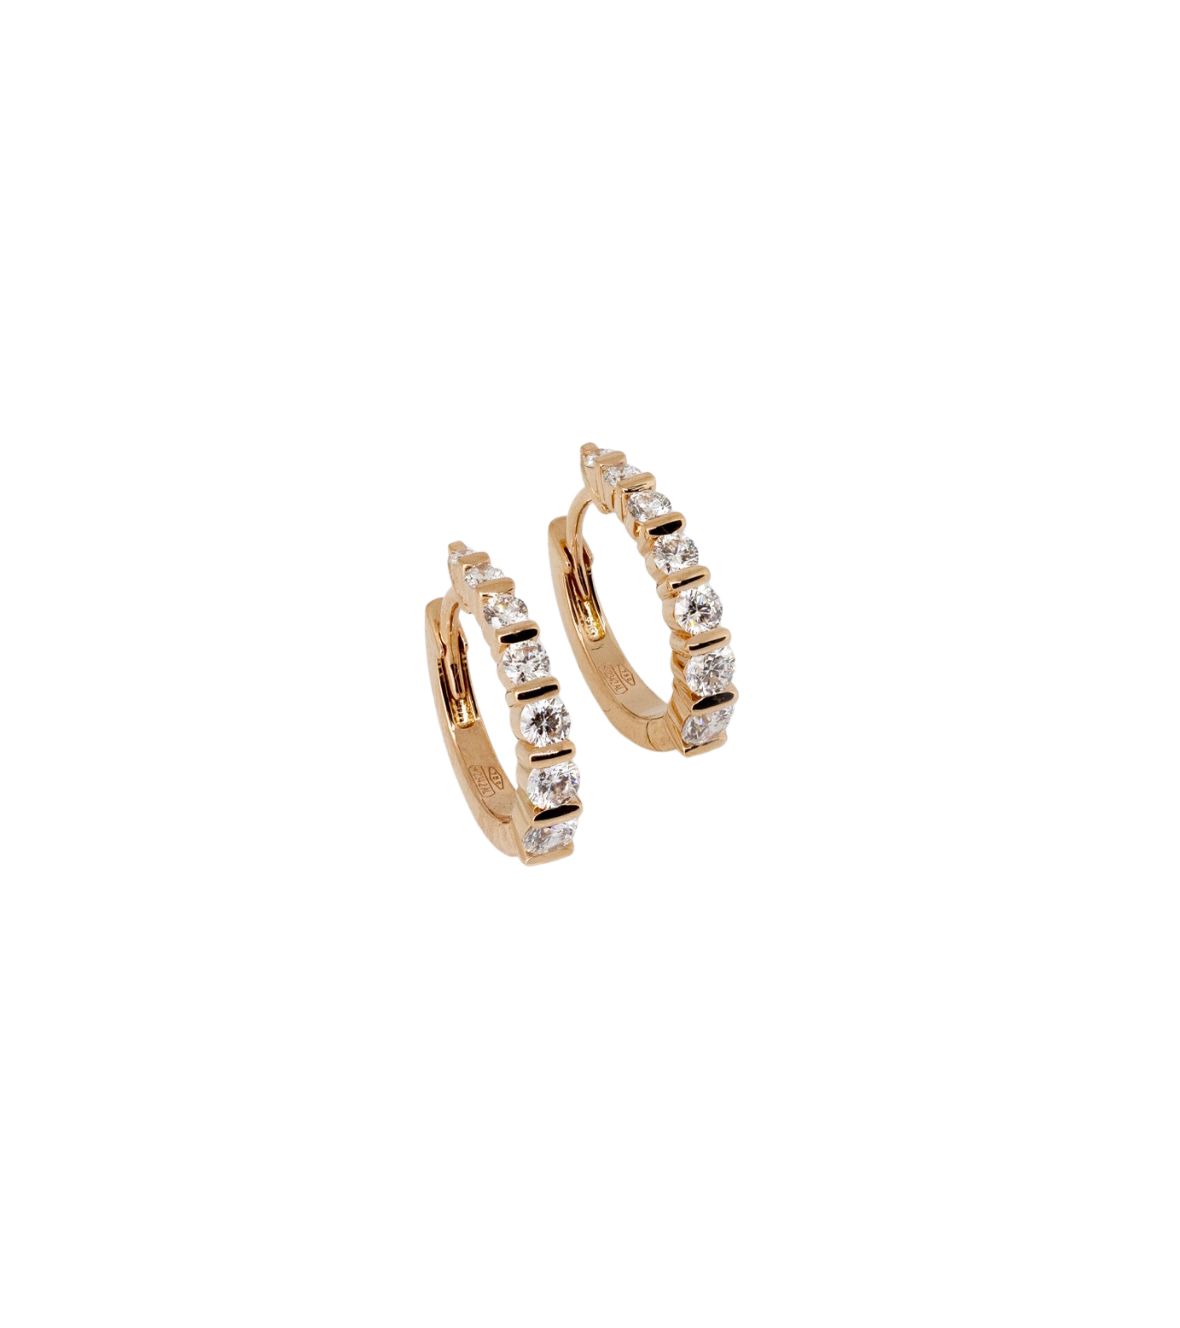 Pink Gold Earrings With Diamonds 03613 by Mentis Collection